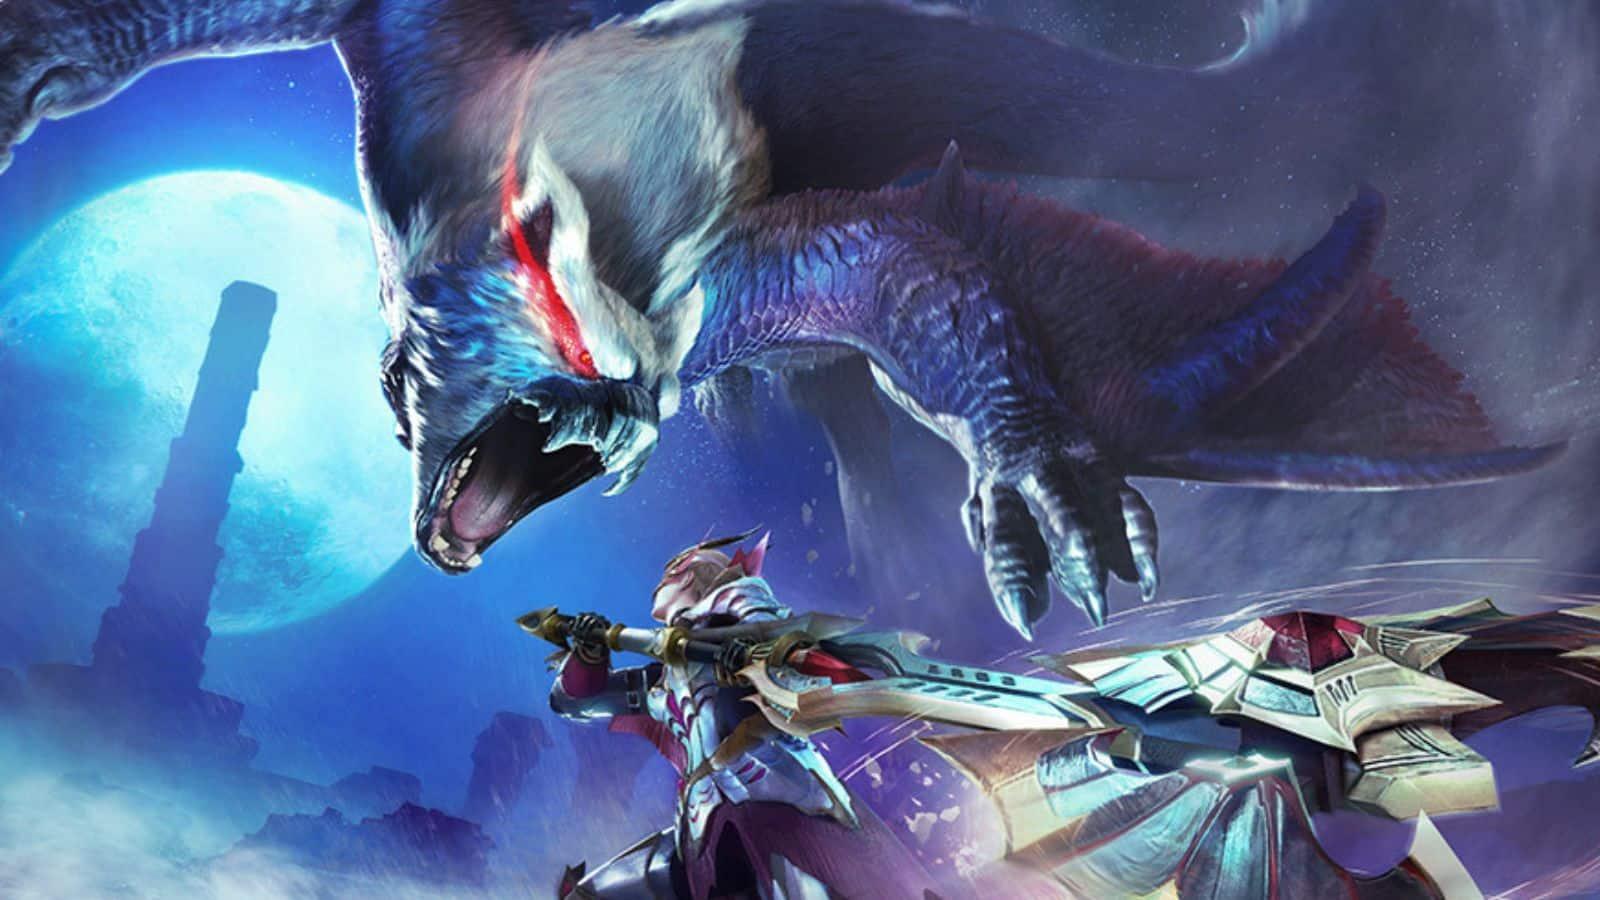 Monster Hunter Rise First Free Title Update Arriving Today, New